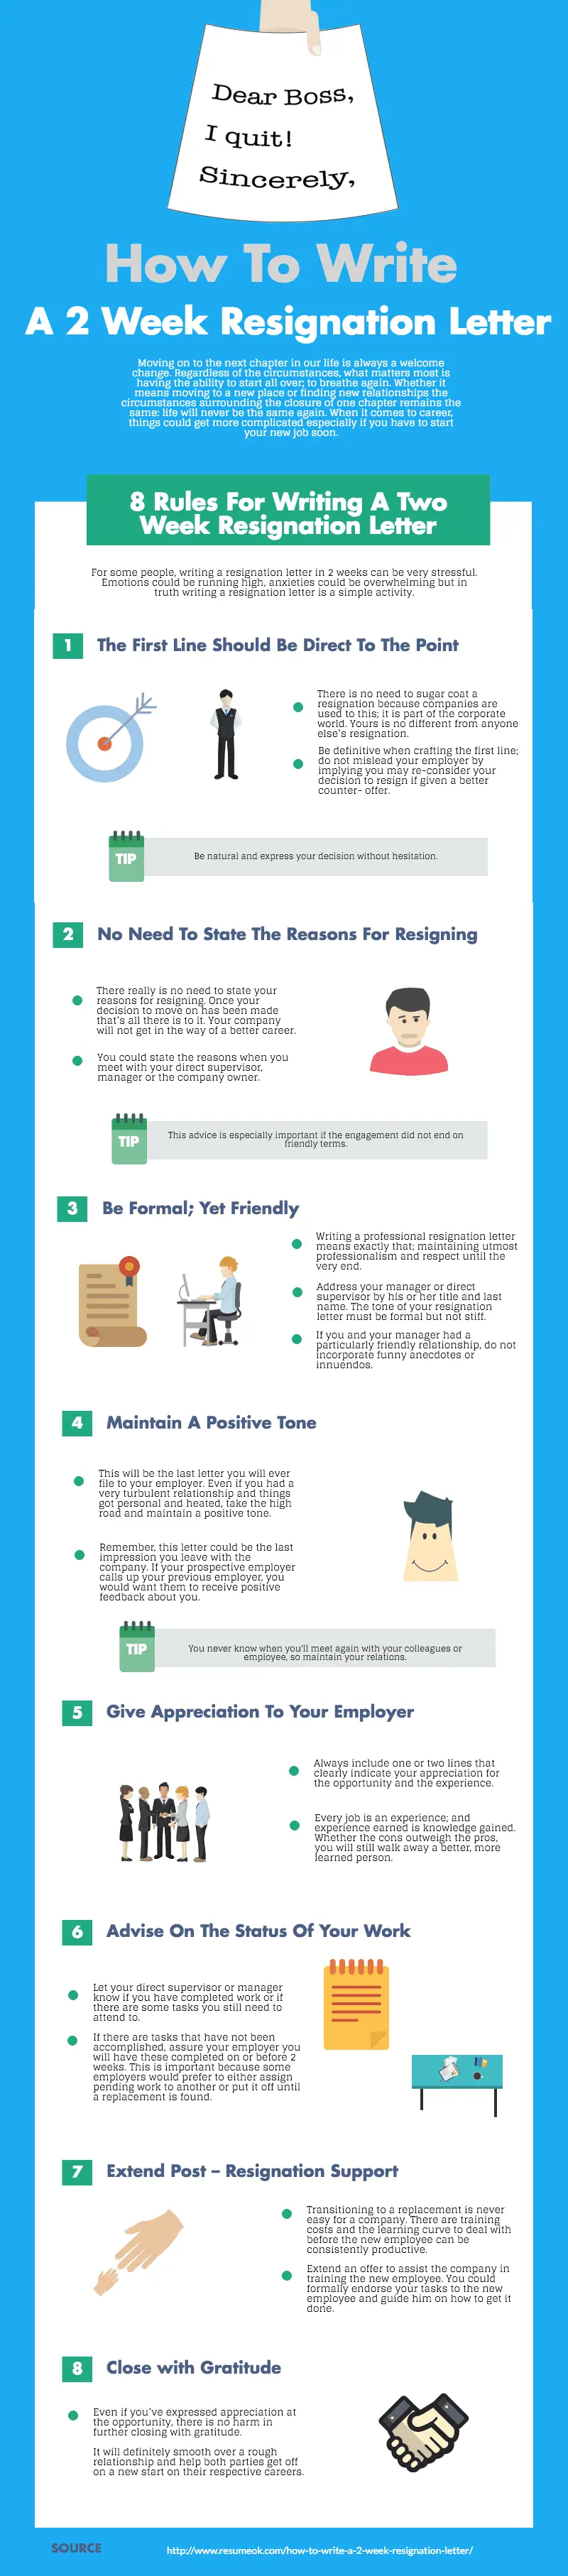 How To Write A 2 Week Resignation Letter infographic